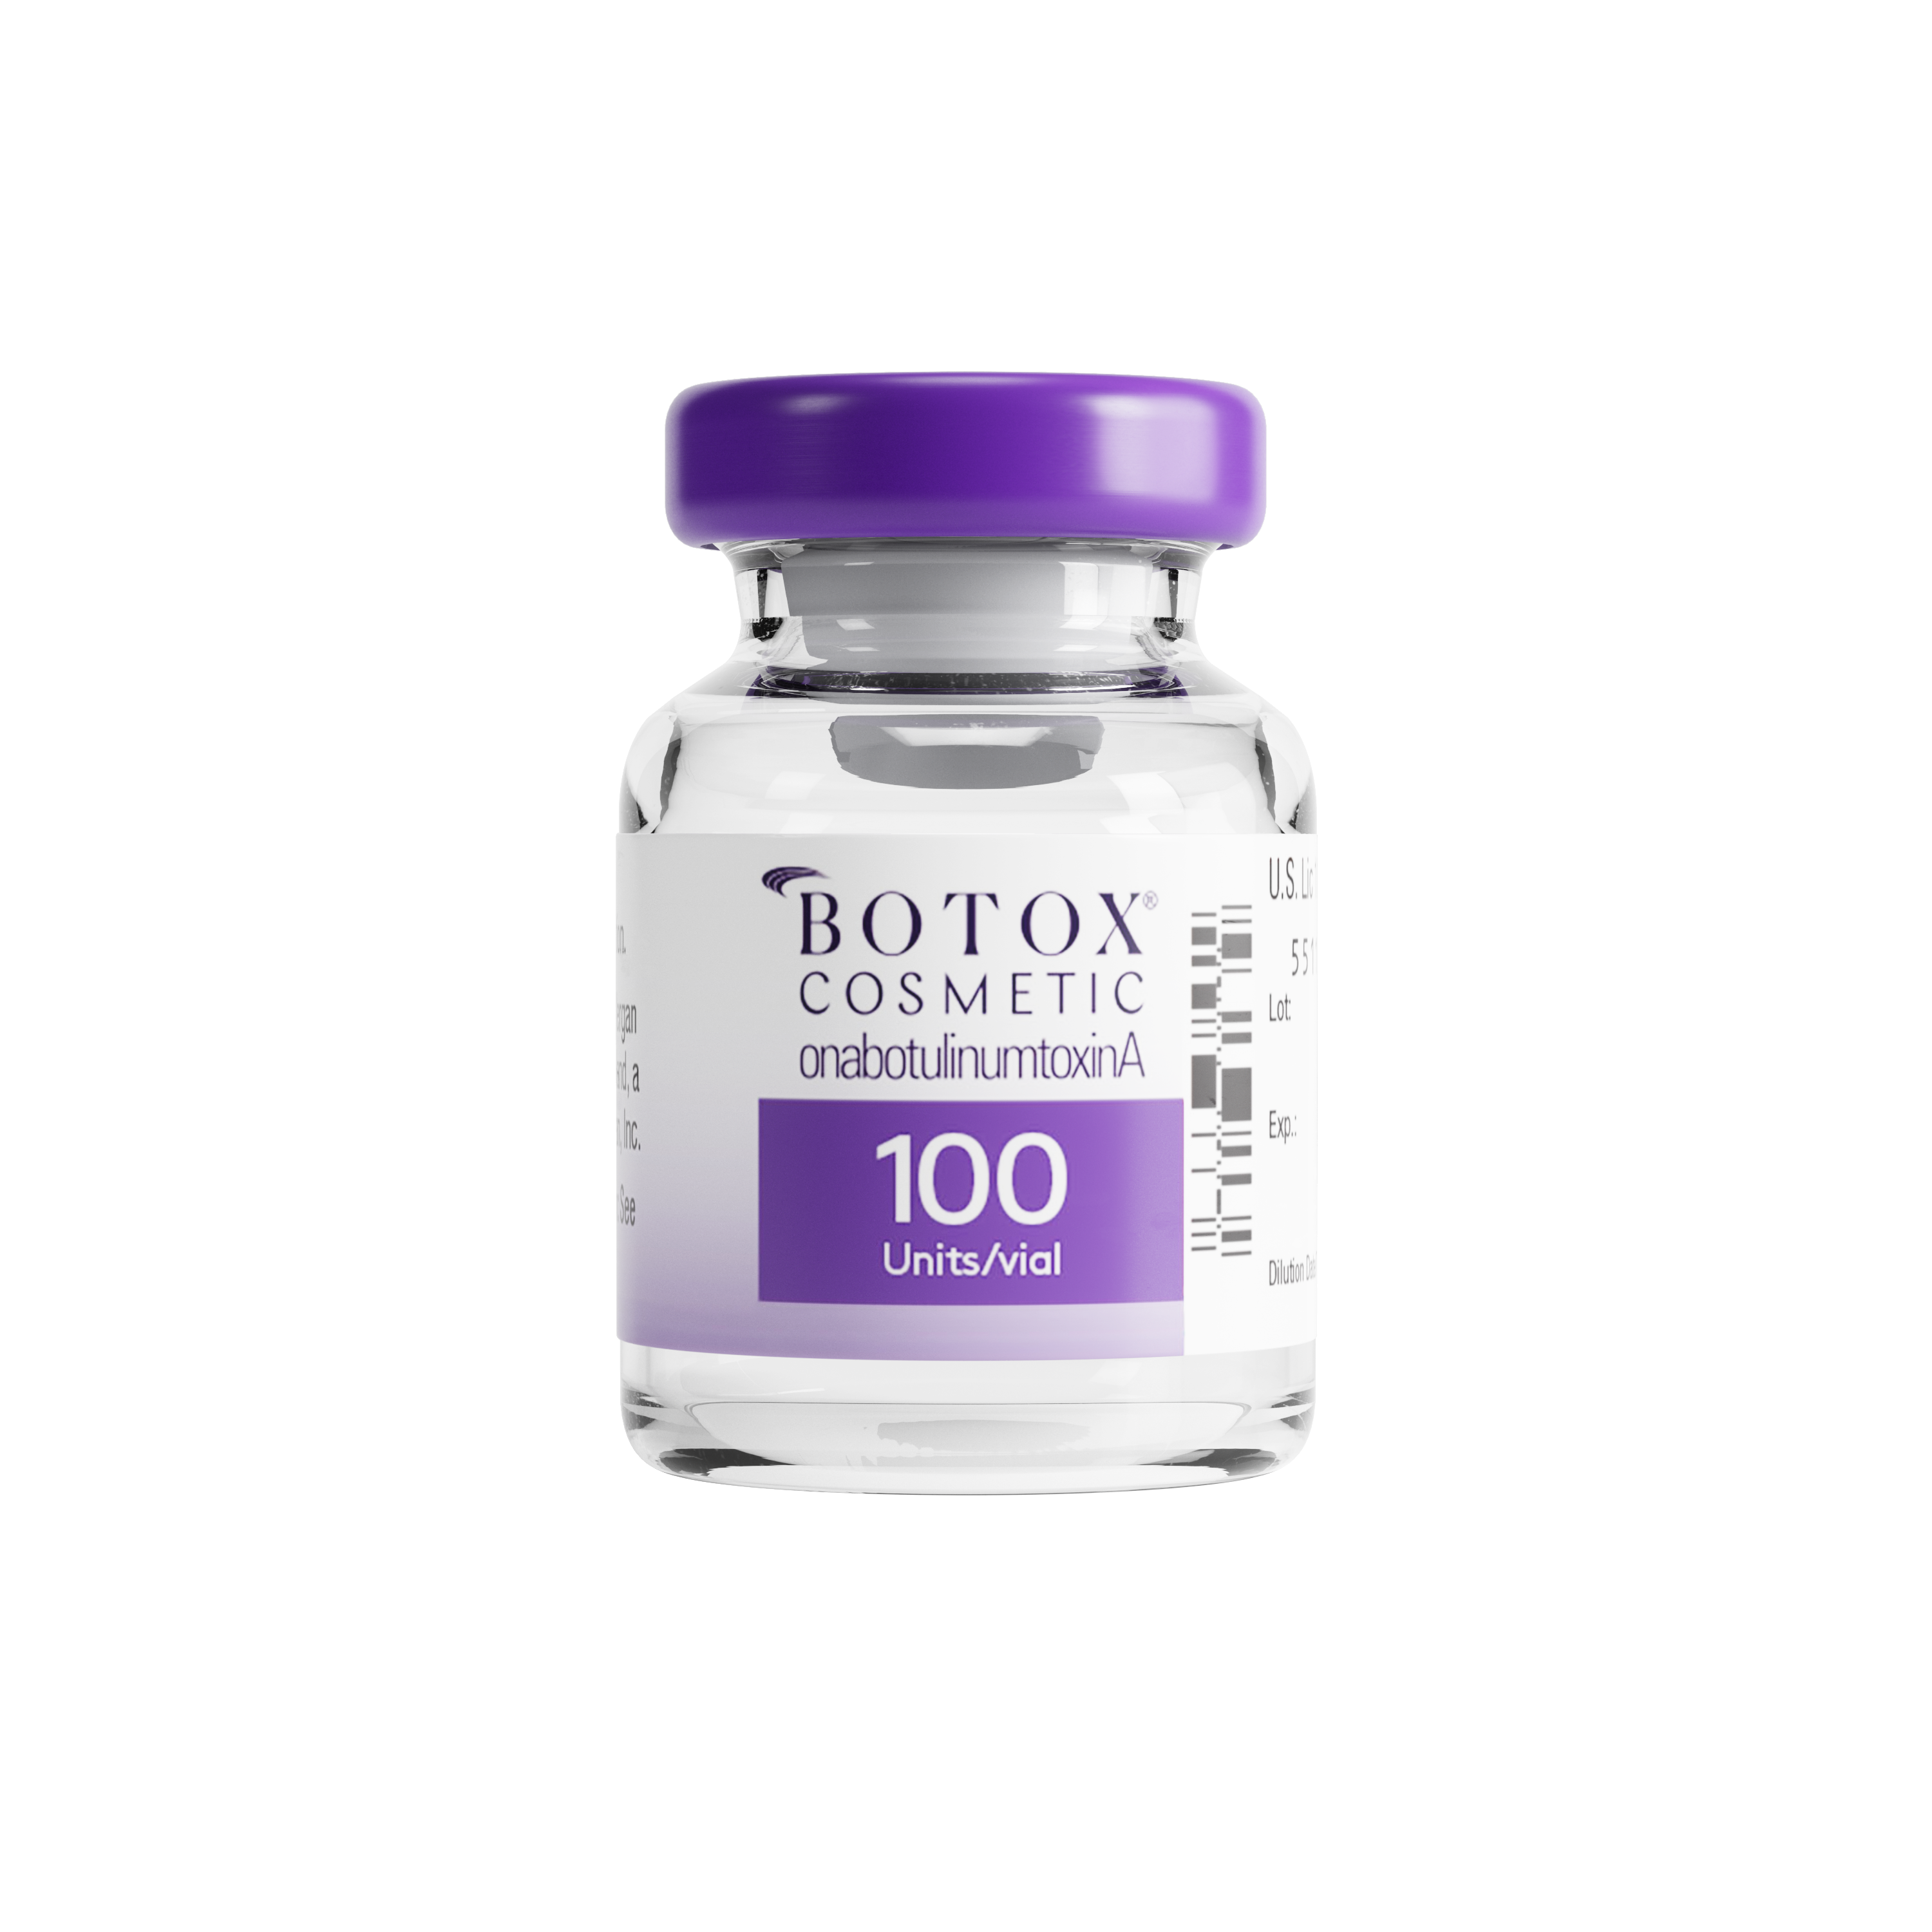 BOTOX® Cosmetic and other injectable neuromodulators including Jeuveau, Dysport and Xeomin are used to treat and prevent lines and wrinkles.  